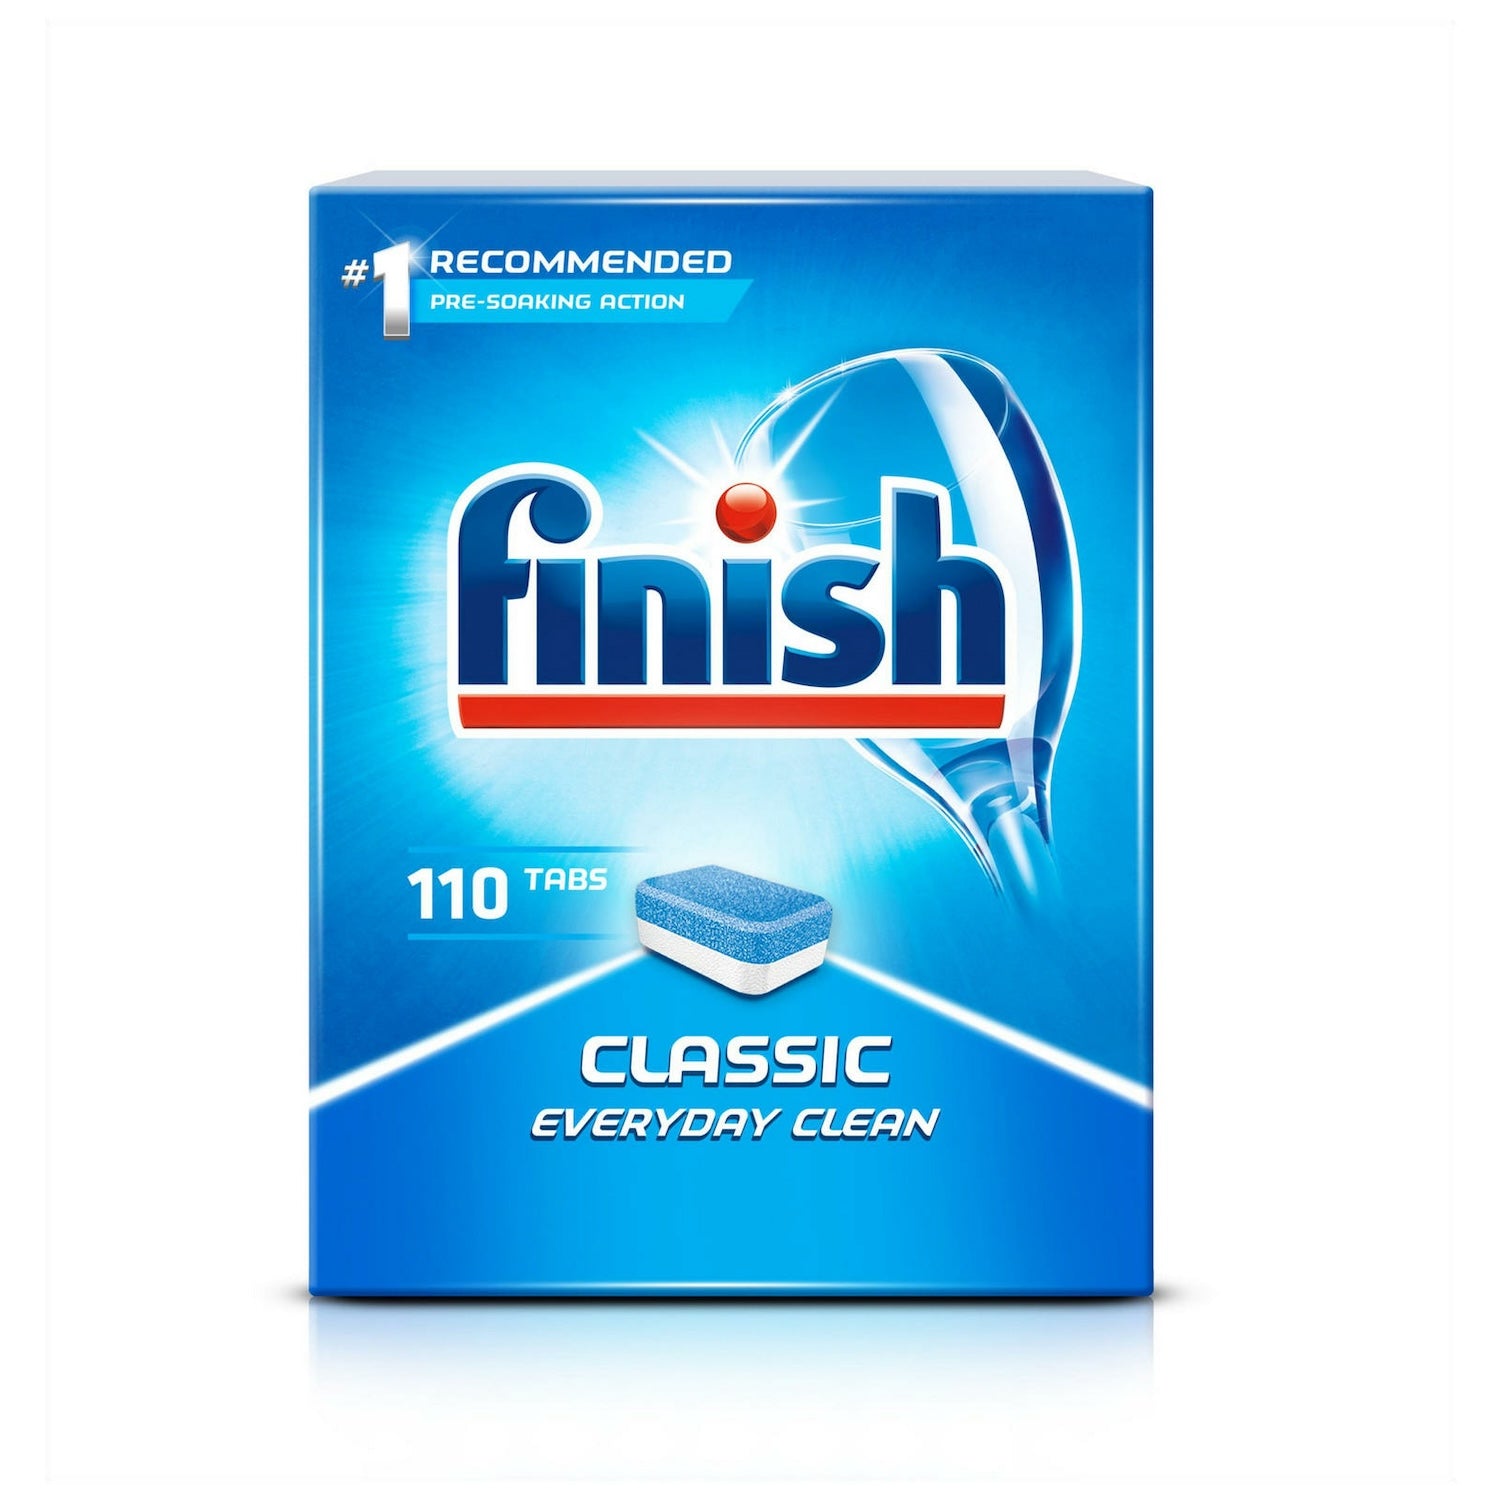 Finish Dishwasher Tablets Cassic | Pack of 110